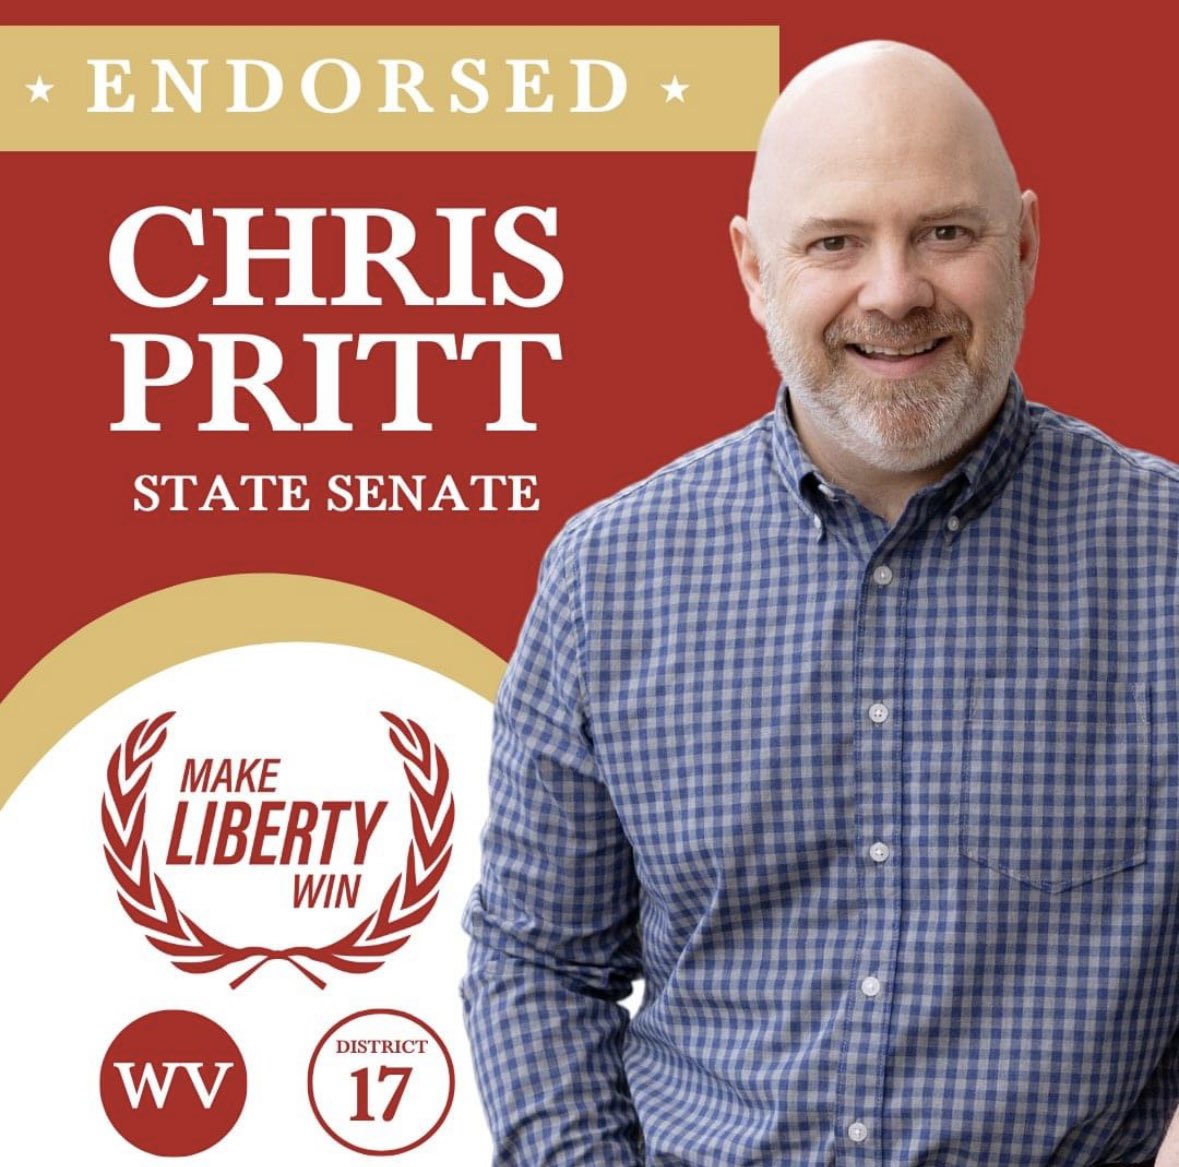 Make Liberty Win's endorsement of my candidacy humbles me. It's a powerful recognition of my unapologetic dedication to defending the Constitution and upholding conservative values. I'm more determined than ever to ensure that liberty prevails in the State Senate! #wvpol